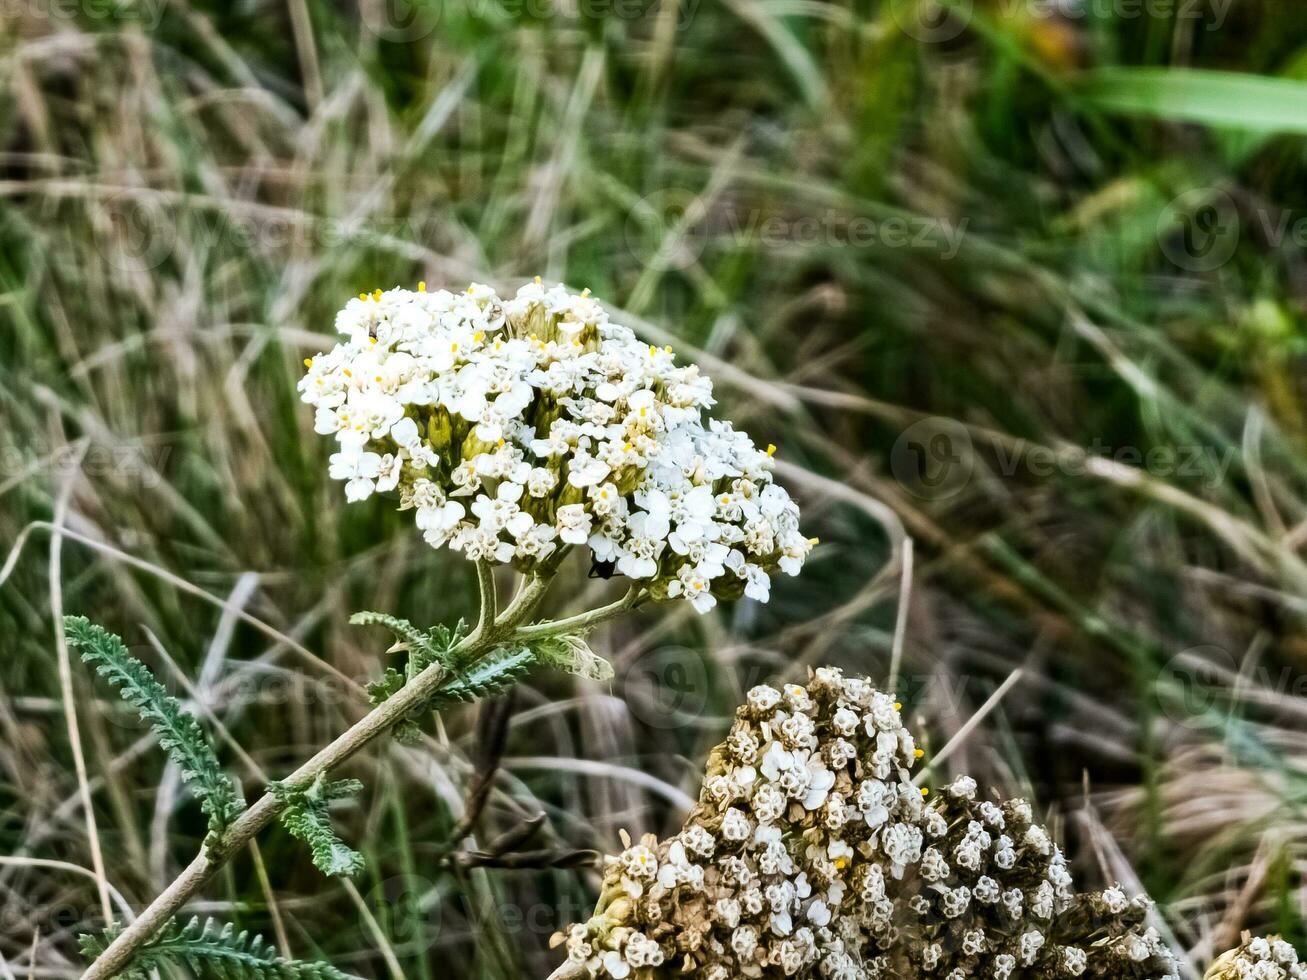 Achillea millefolium, commonly known as yarrow or common yarrow, is a flowering plant in the family Asteraceae. photo